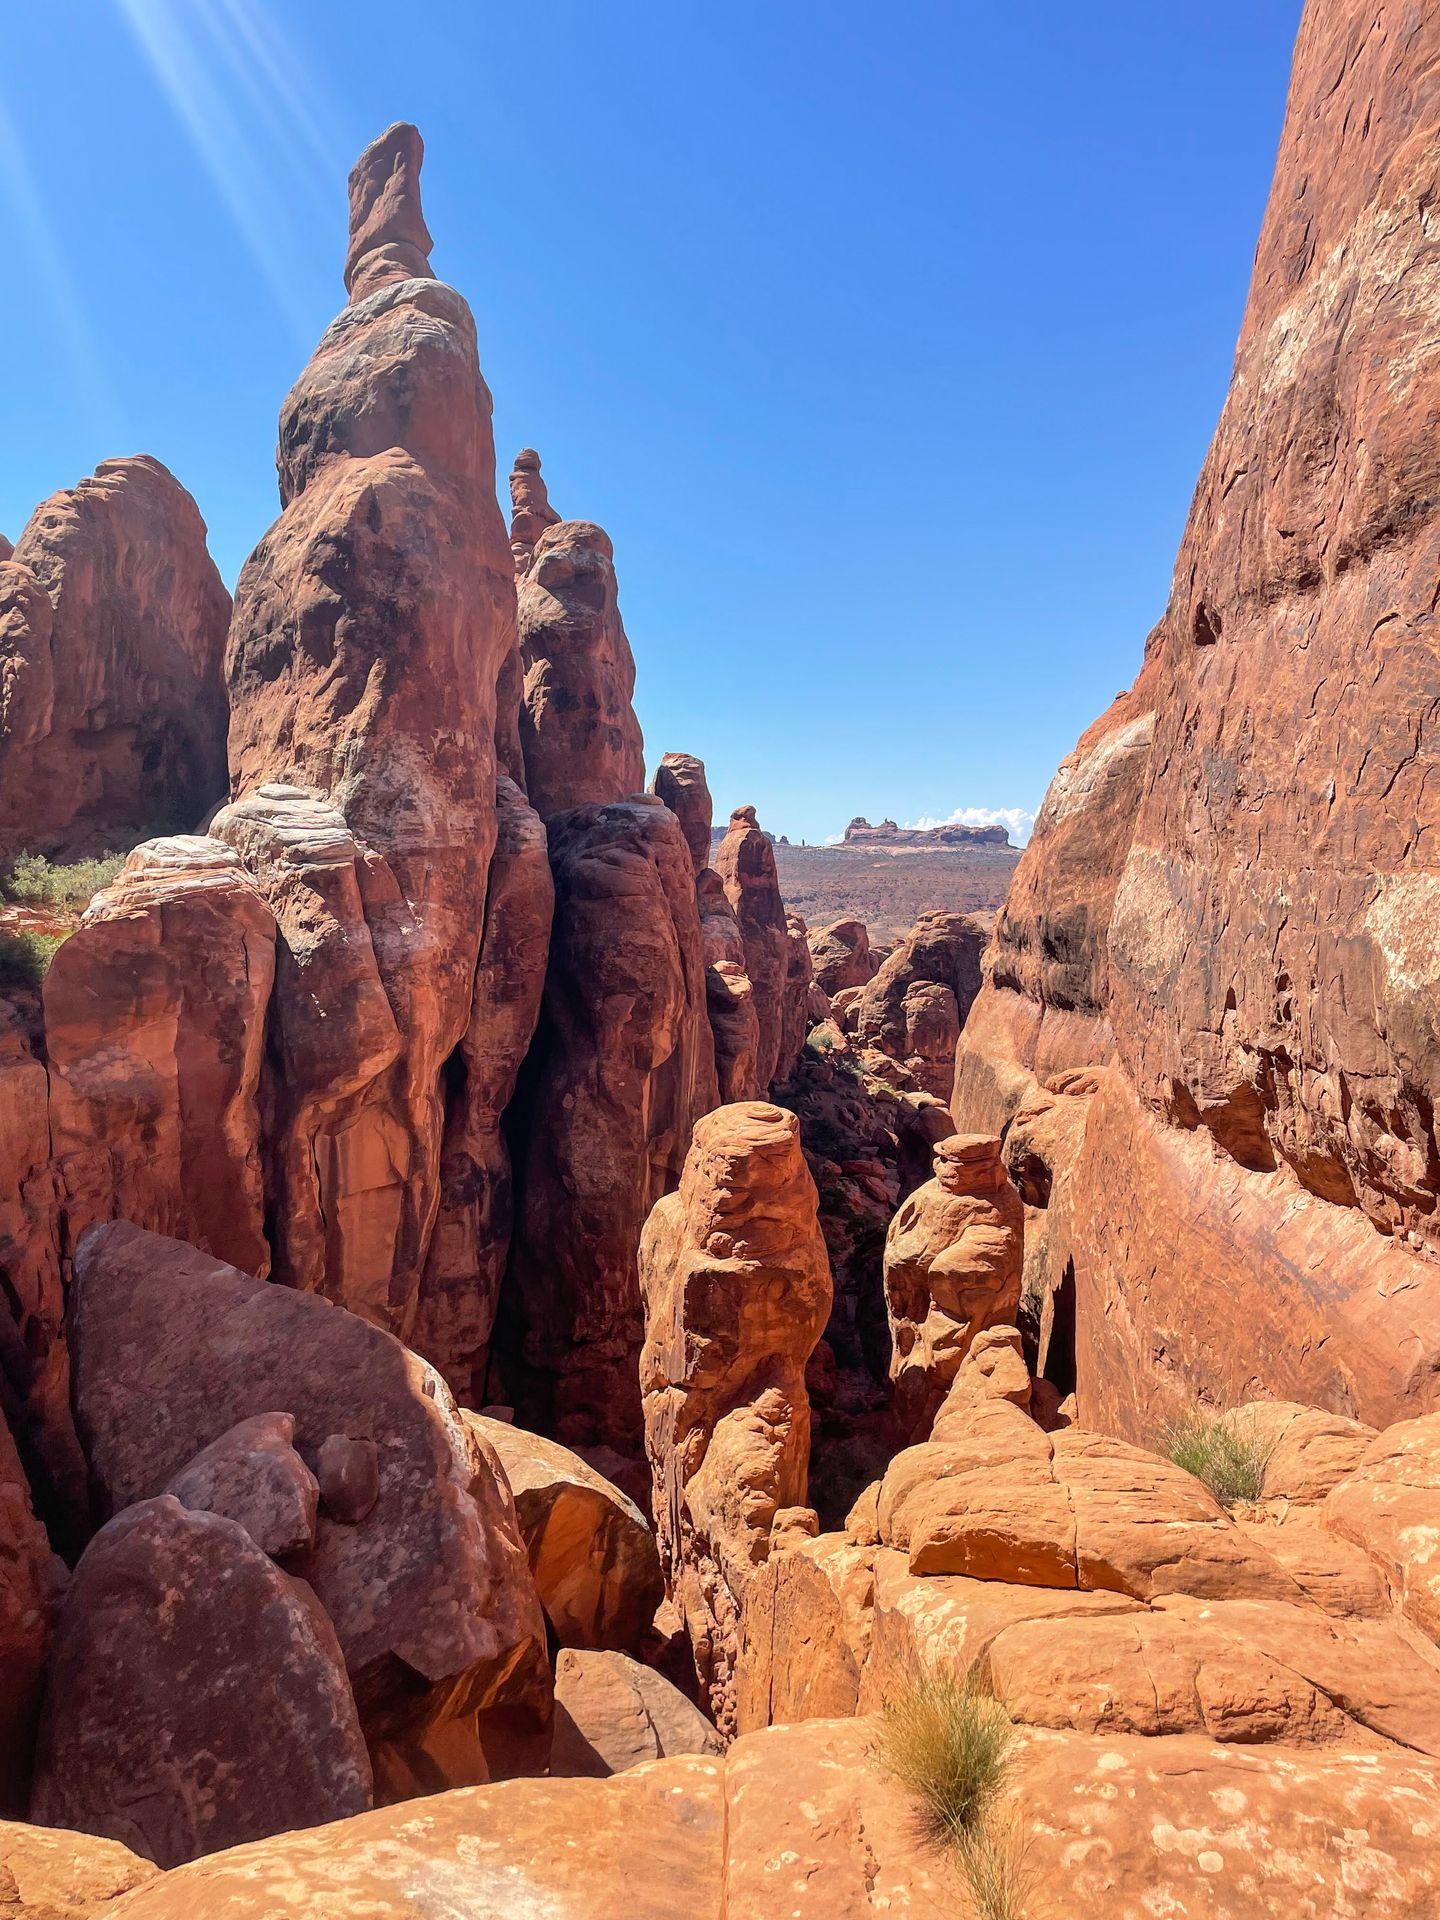 Towering orange rock formations inside the Fiery Furnace in Arches National Park.